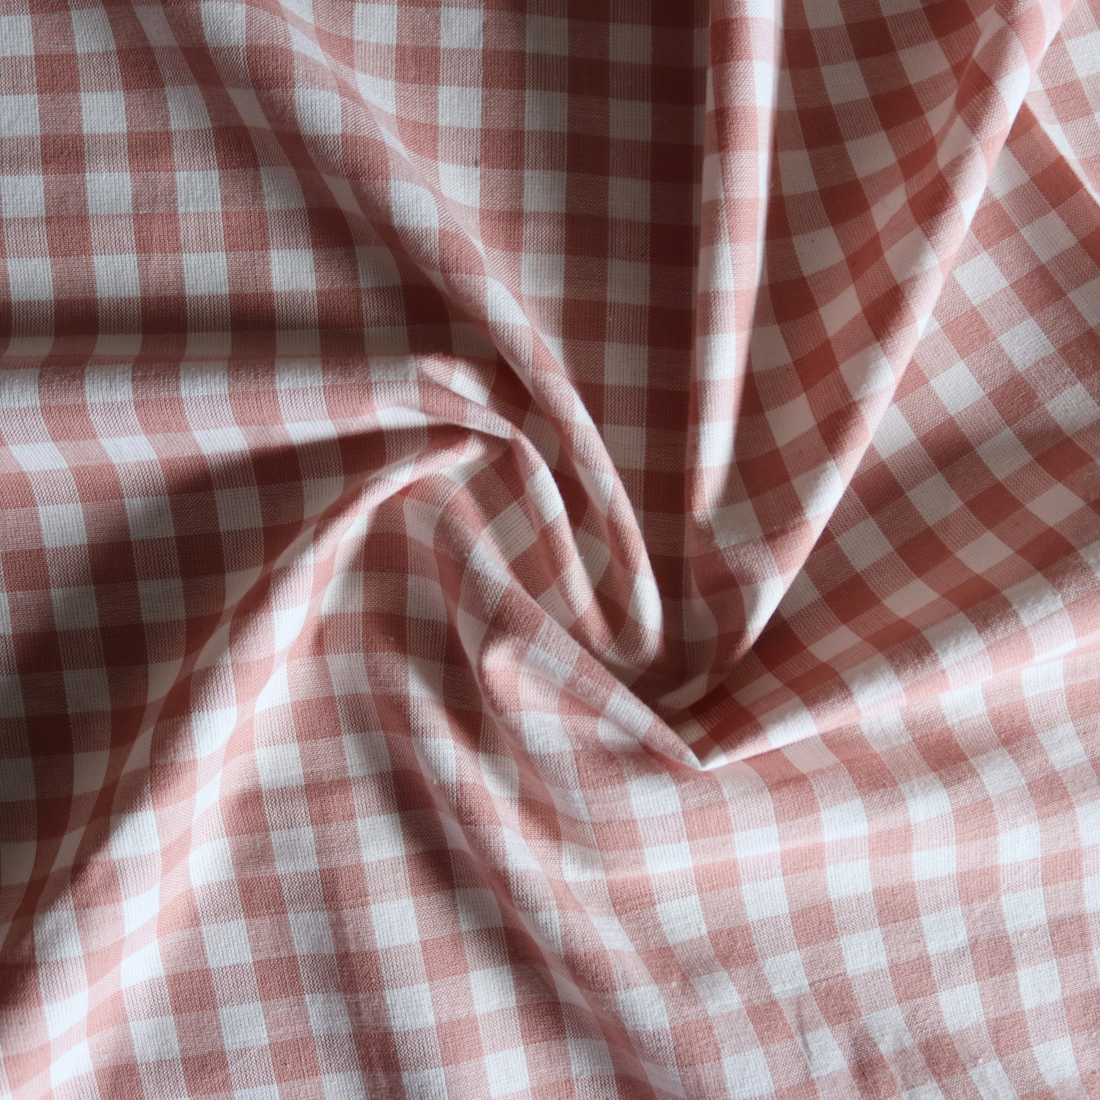 Rosa - Small Check Gingham - Cotton Fabric